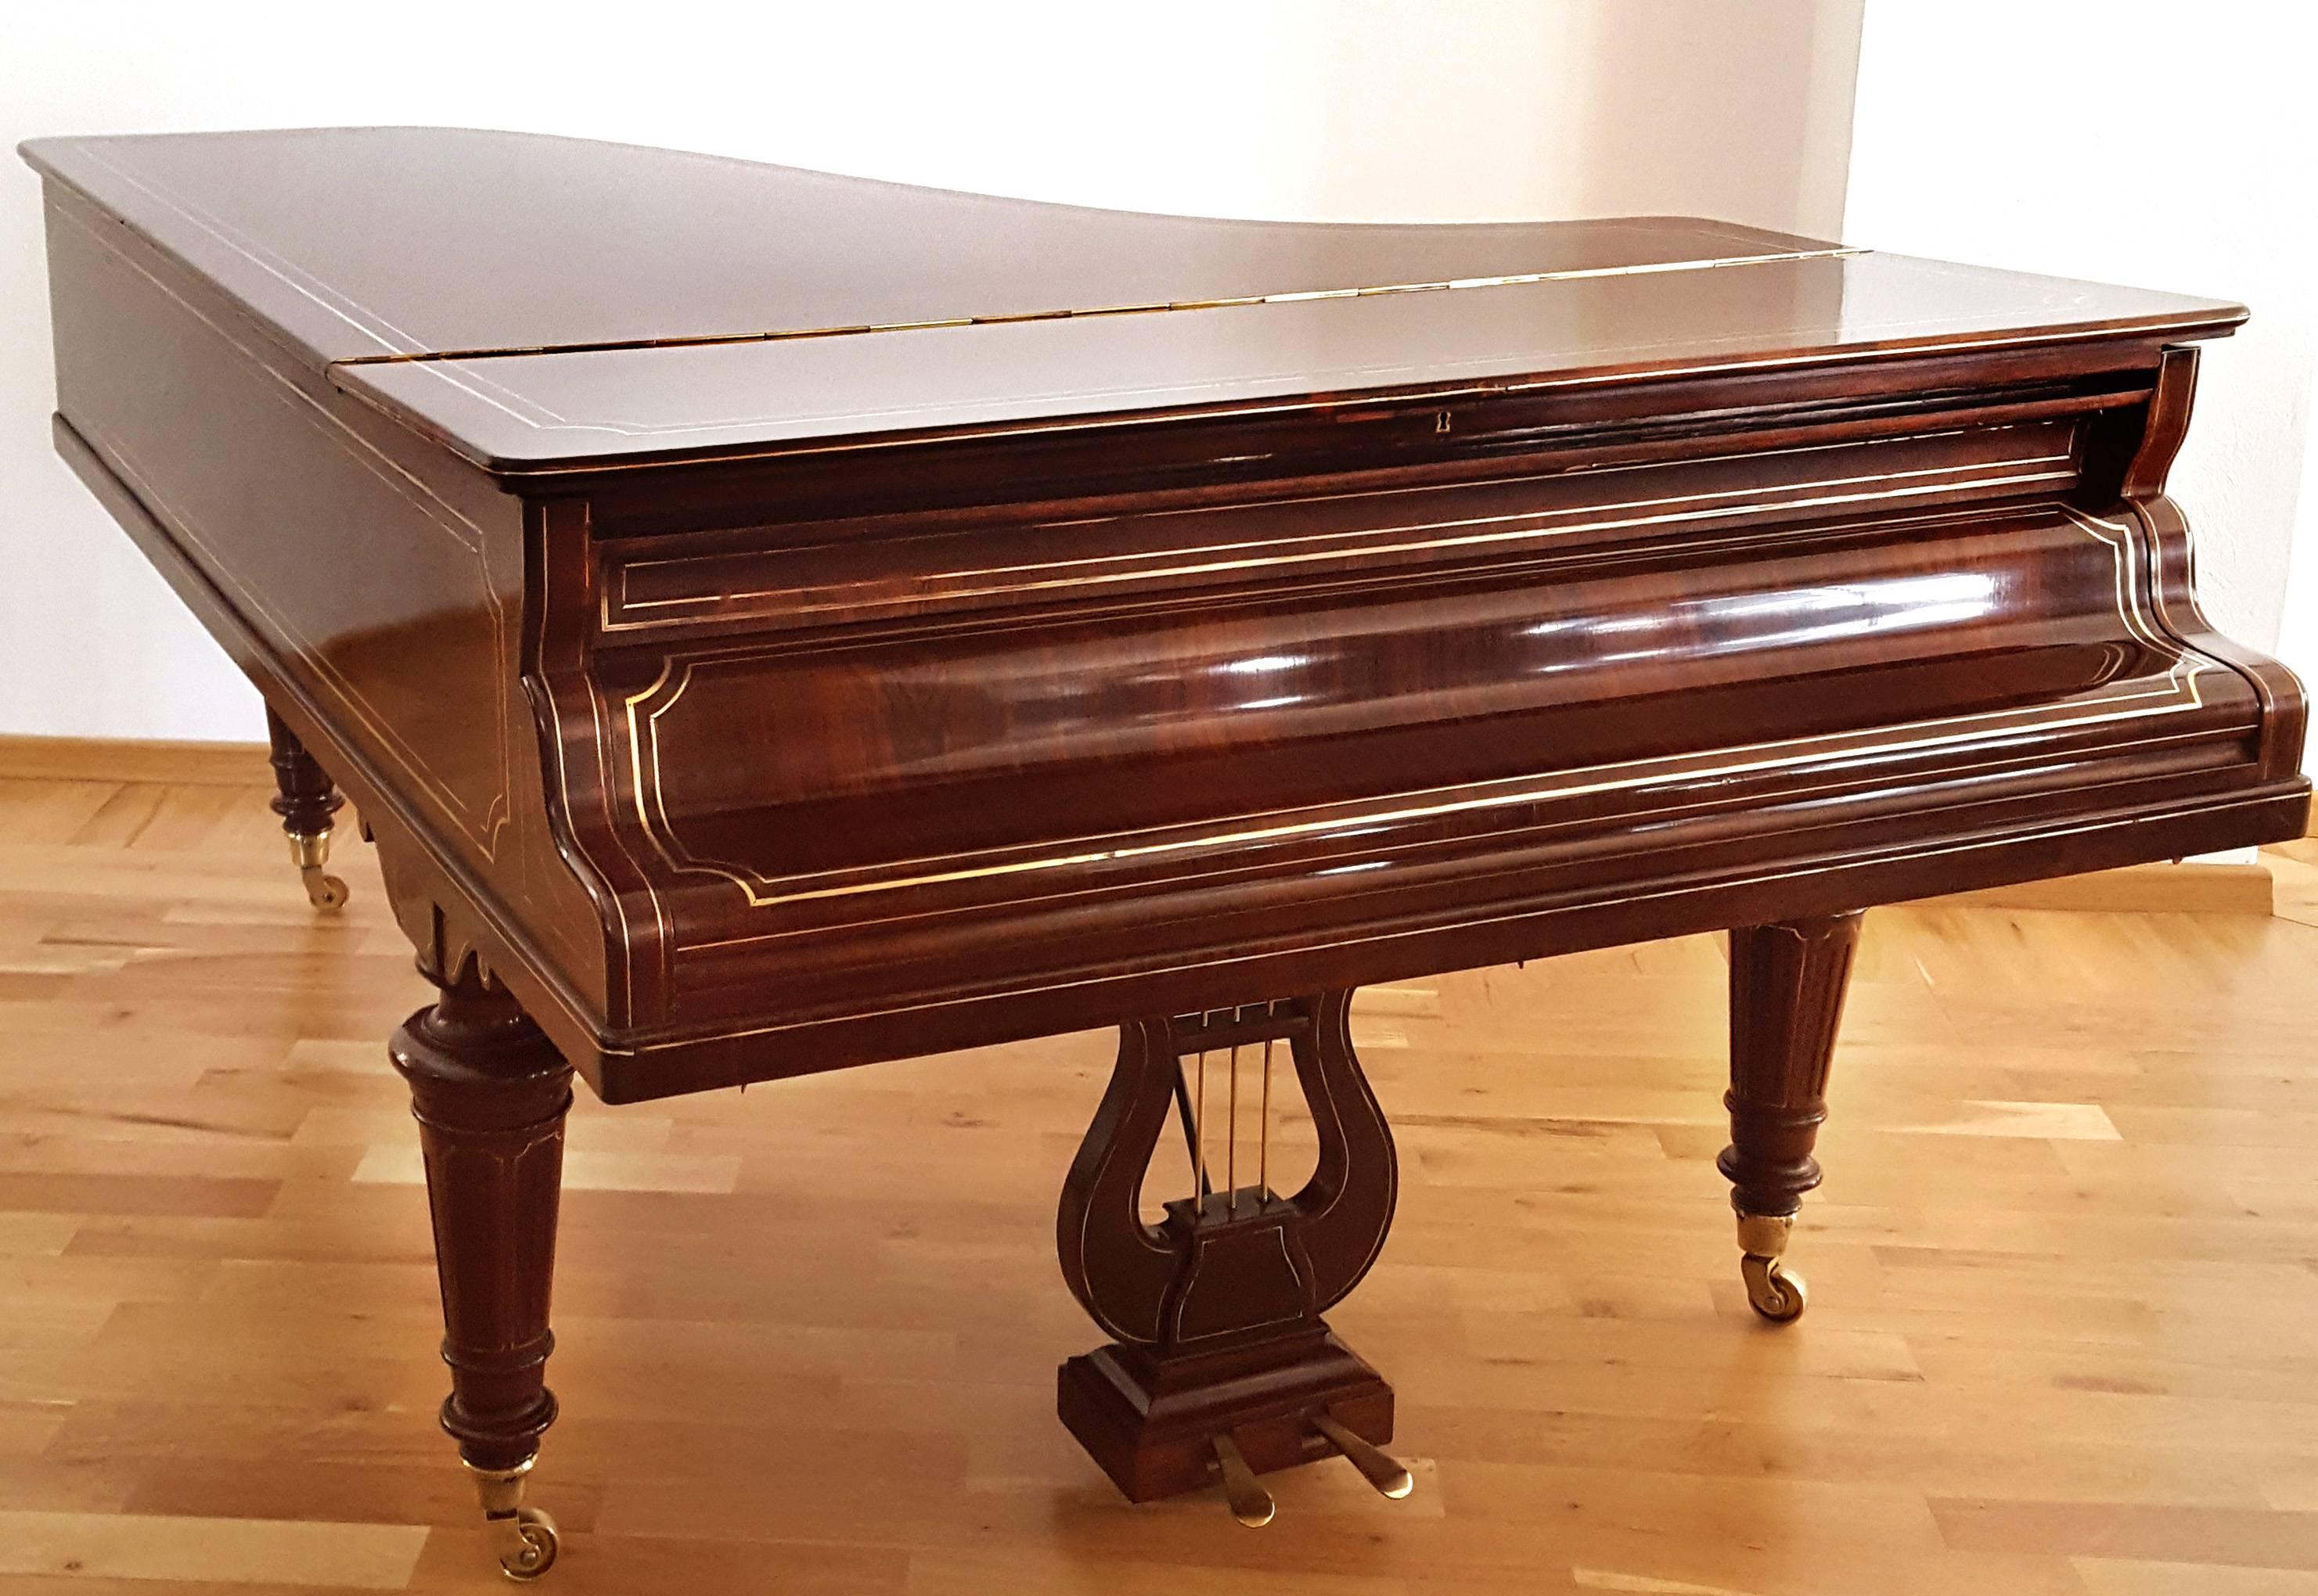 Erard grand serial number 49613 made in the year 1875 in a beautiful stunning case of dark rosewood with bands of brass inlay enhancing the cases beauty. This outstanding rare grand piano has been restored by our specialists keeping all its original